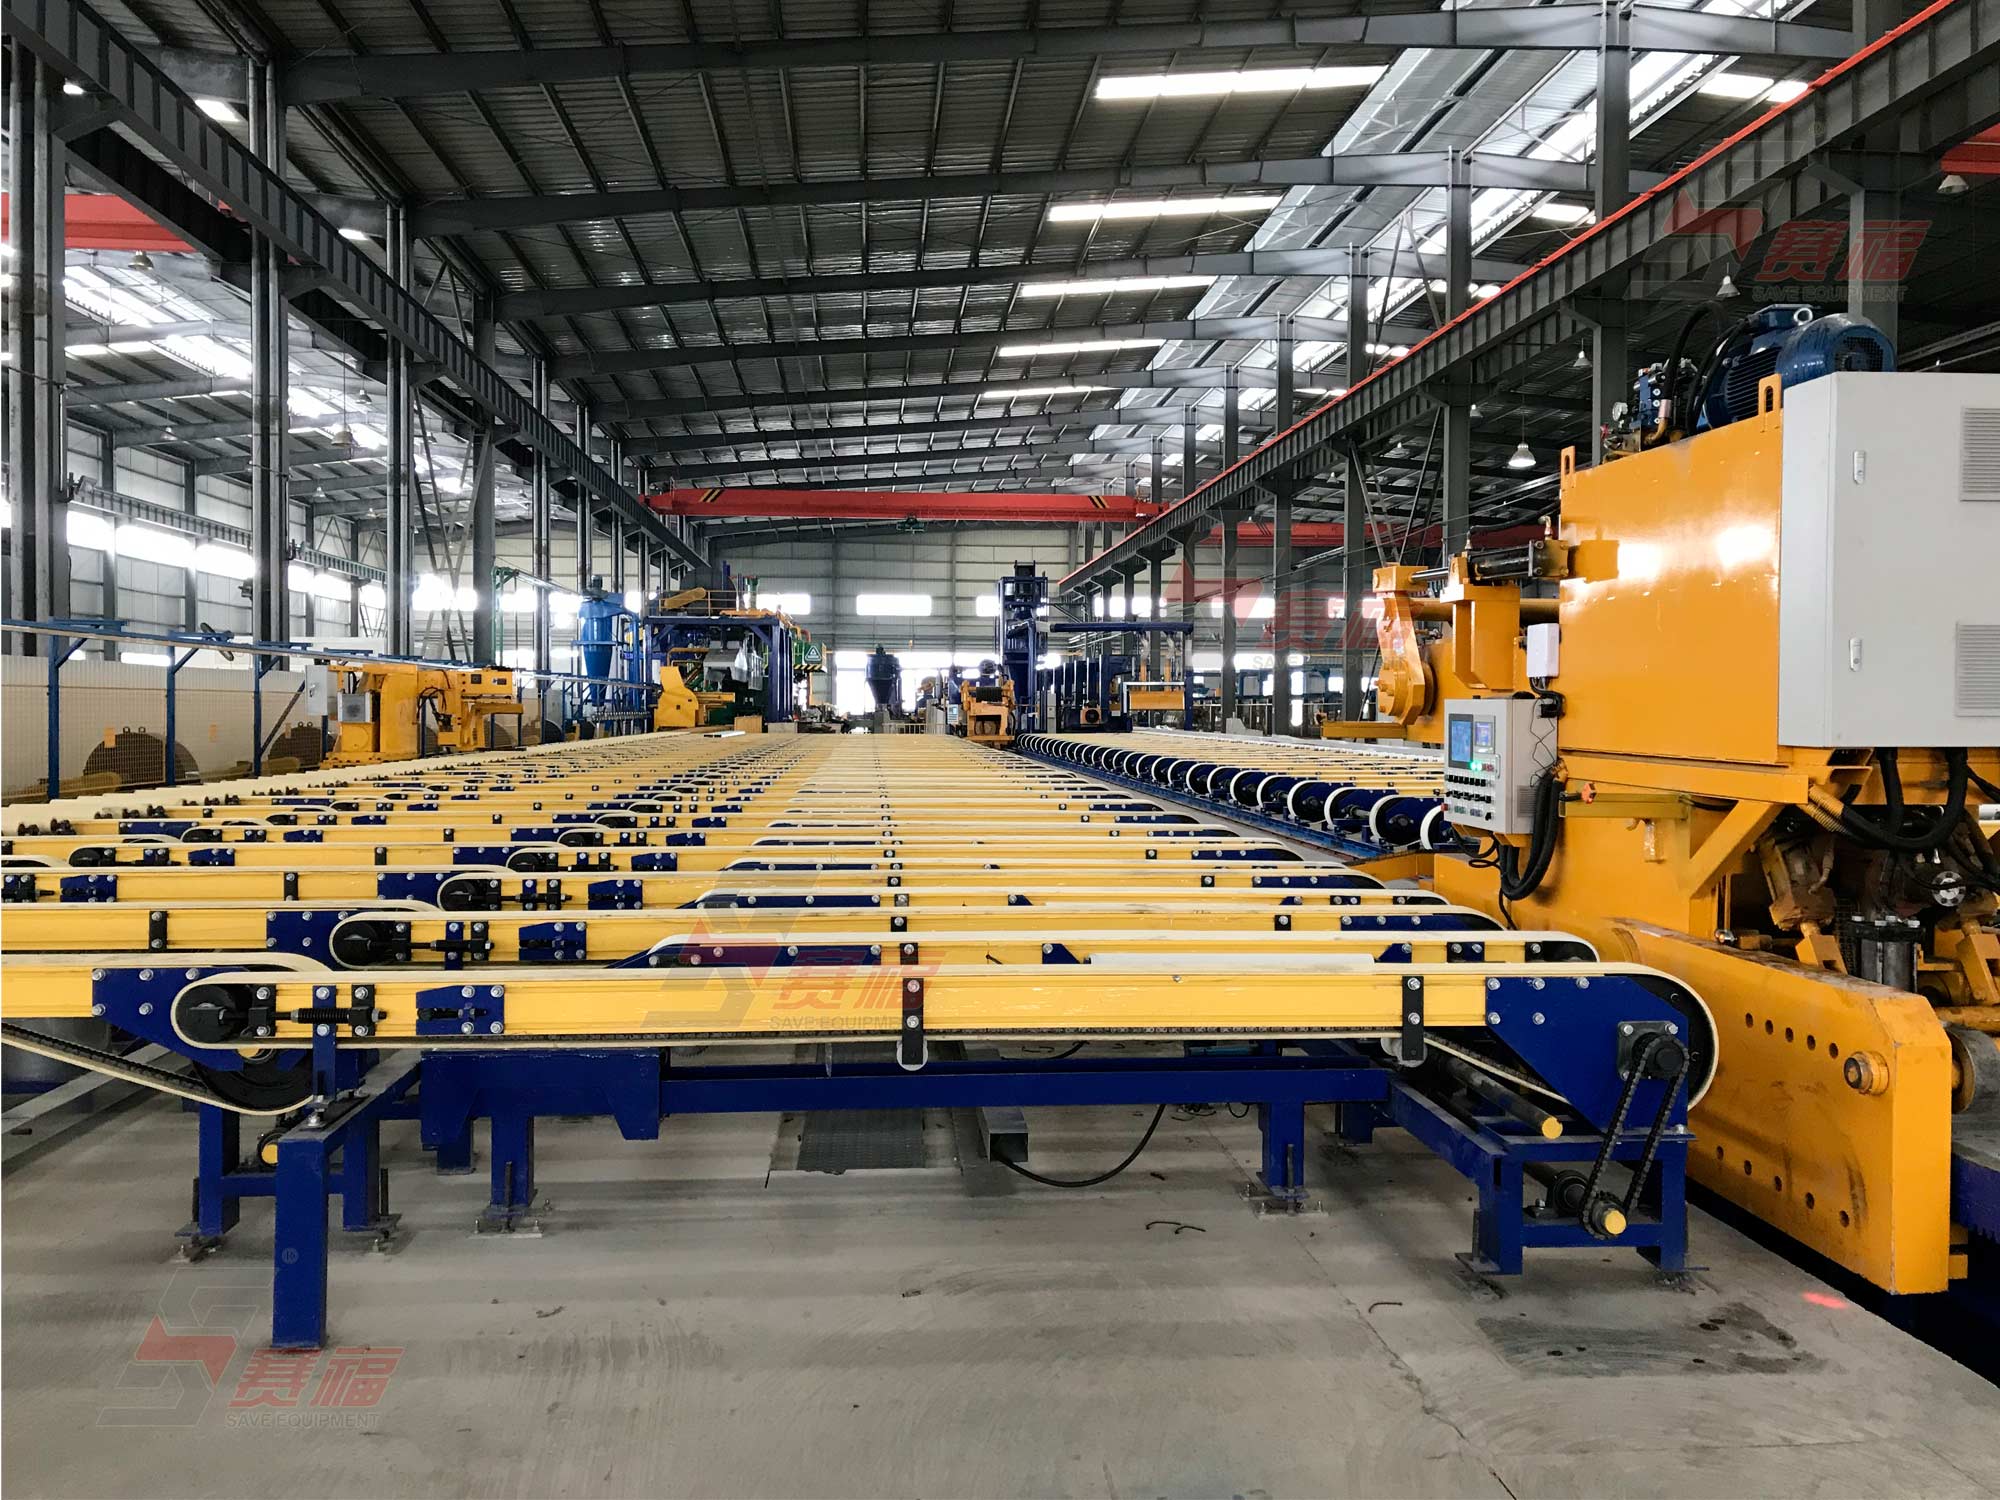 5500-ton extrusion line in Sichuan Guanghan Sanxing New Material Technology